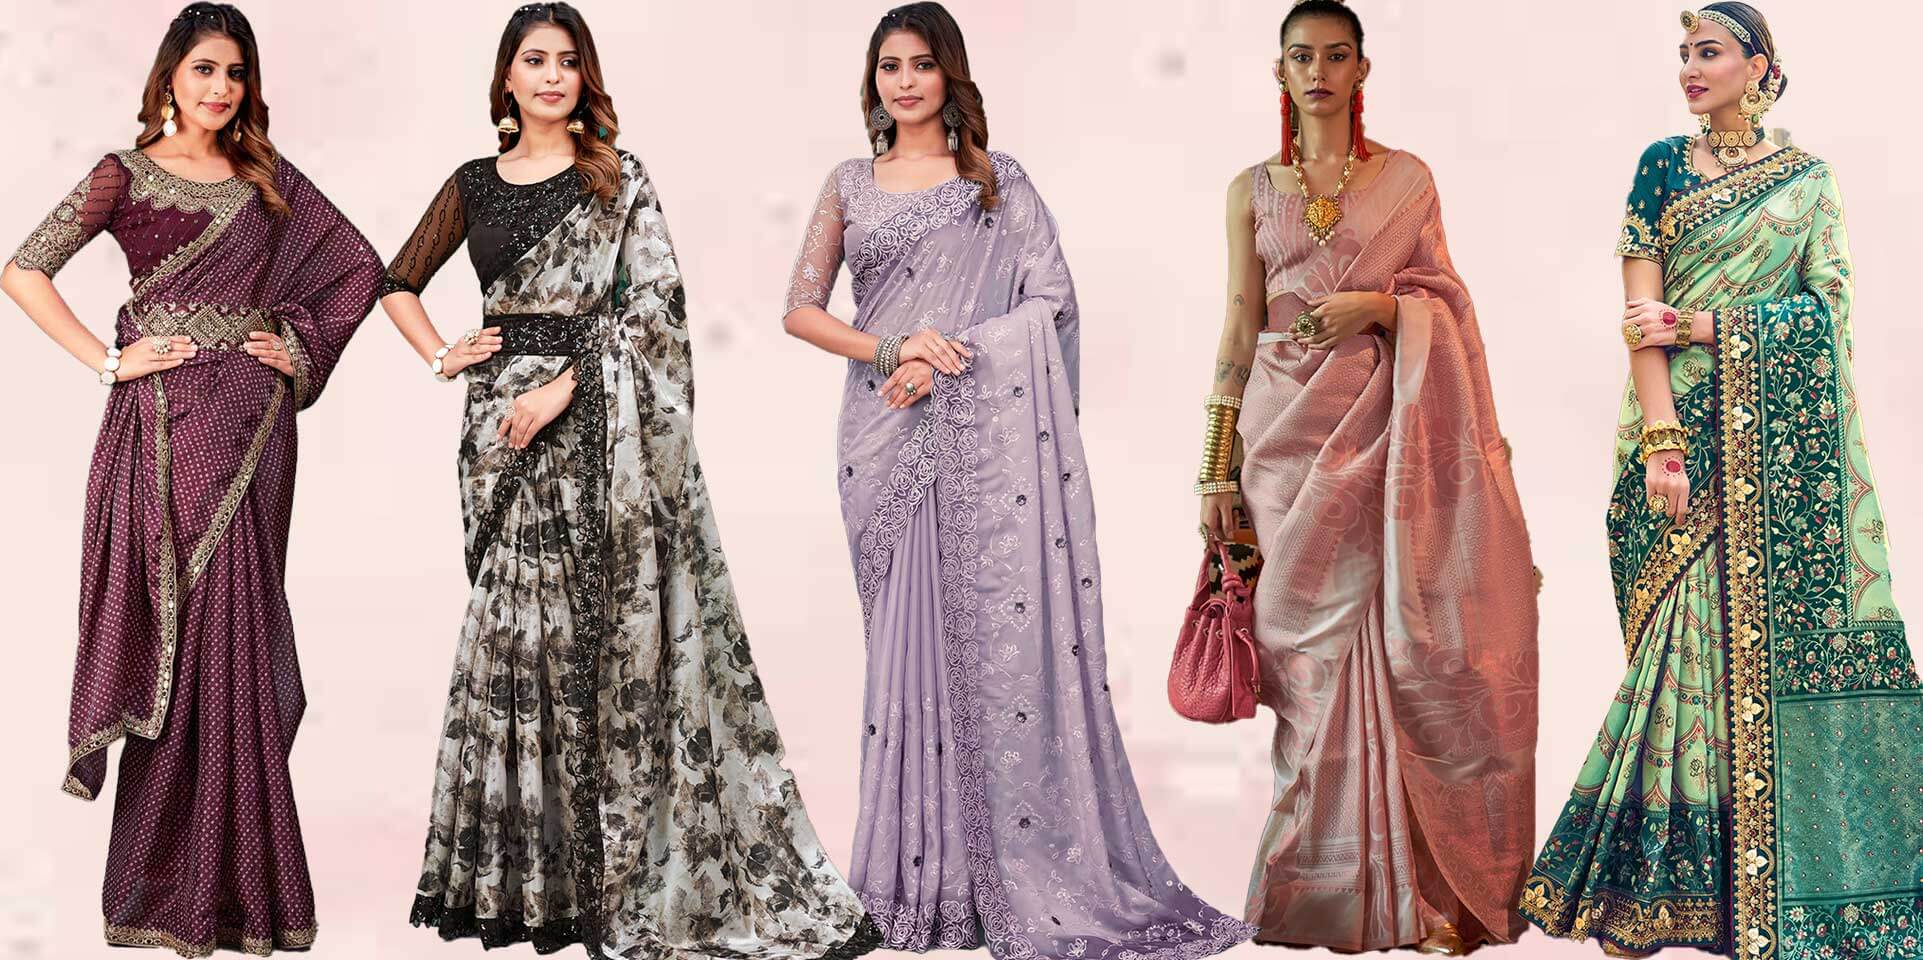 Where to Buy Indian Bridal Sarees in USA?